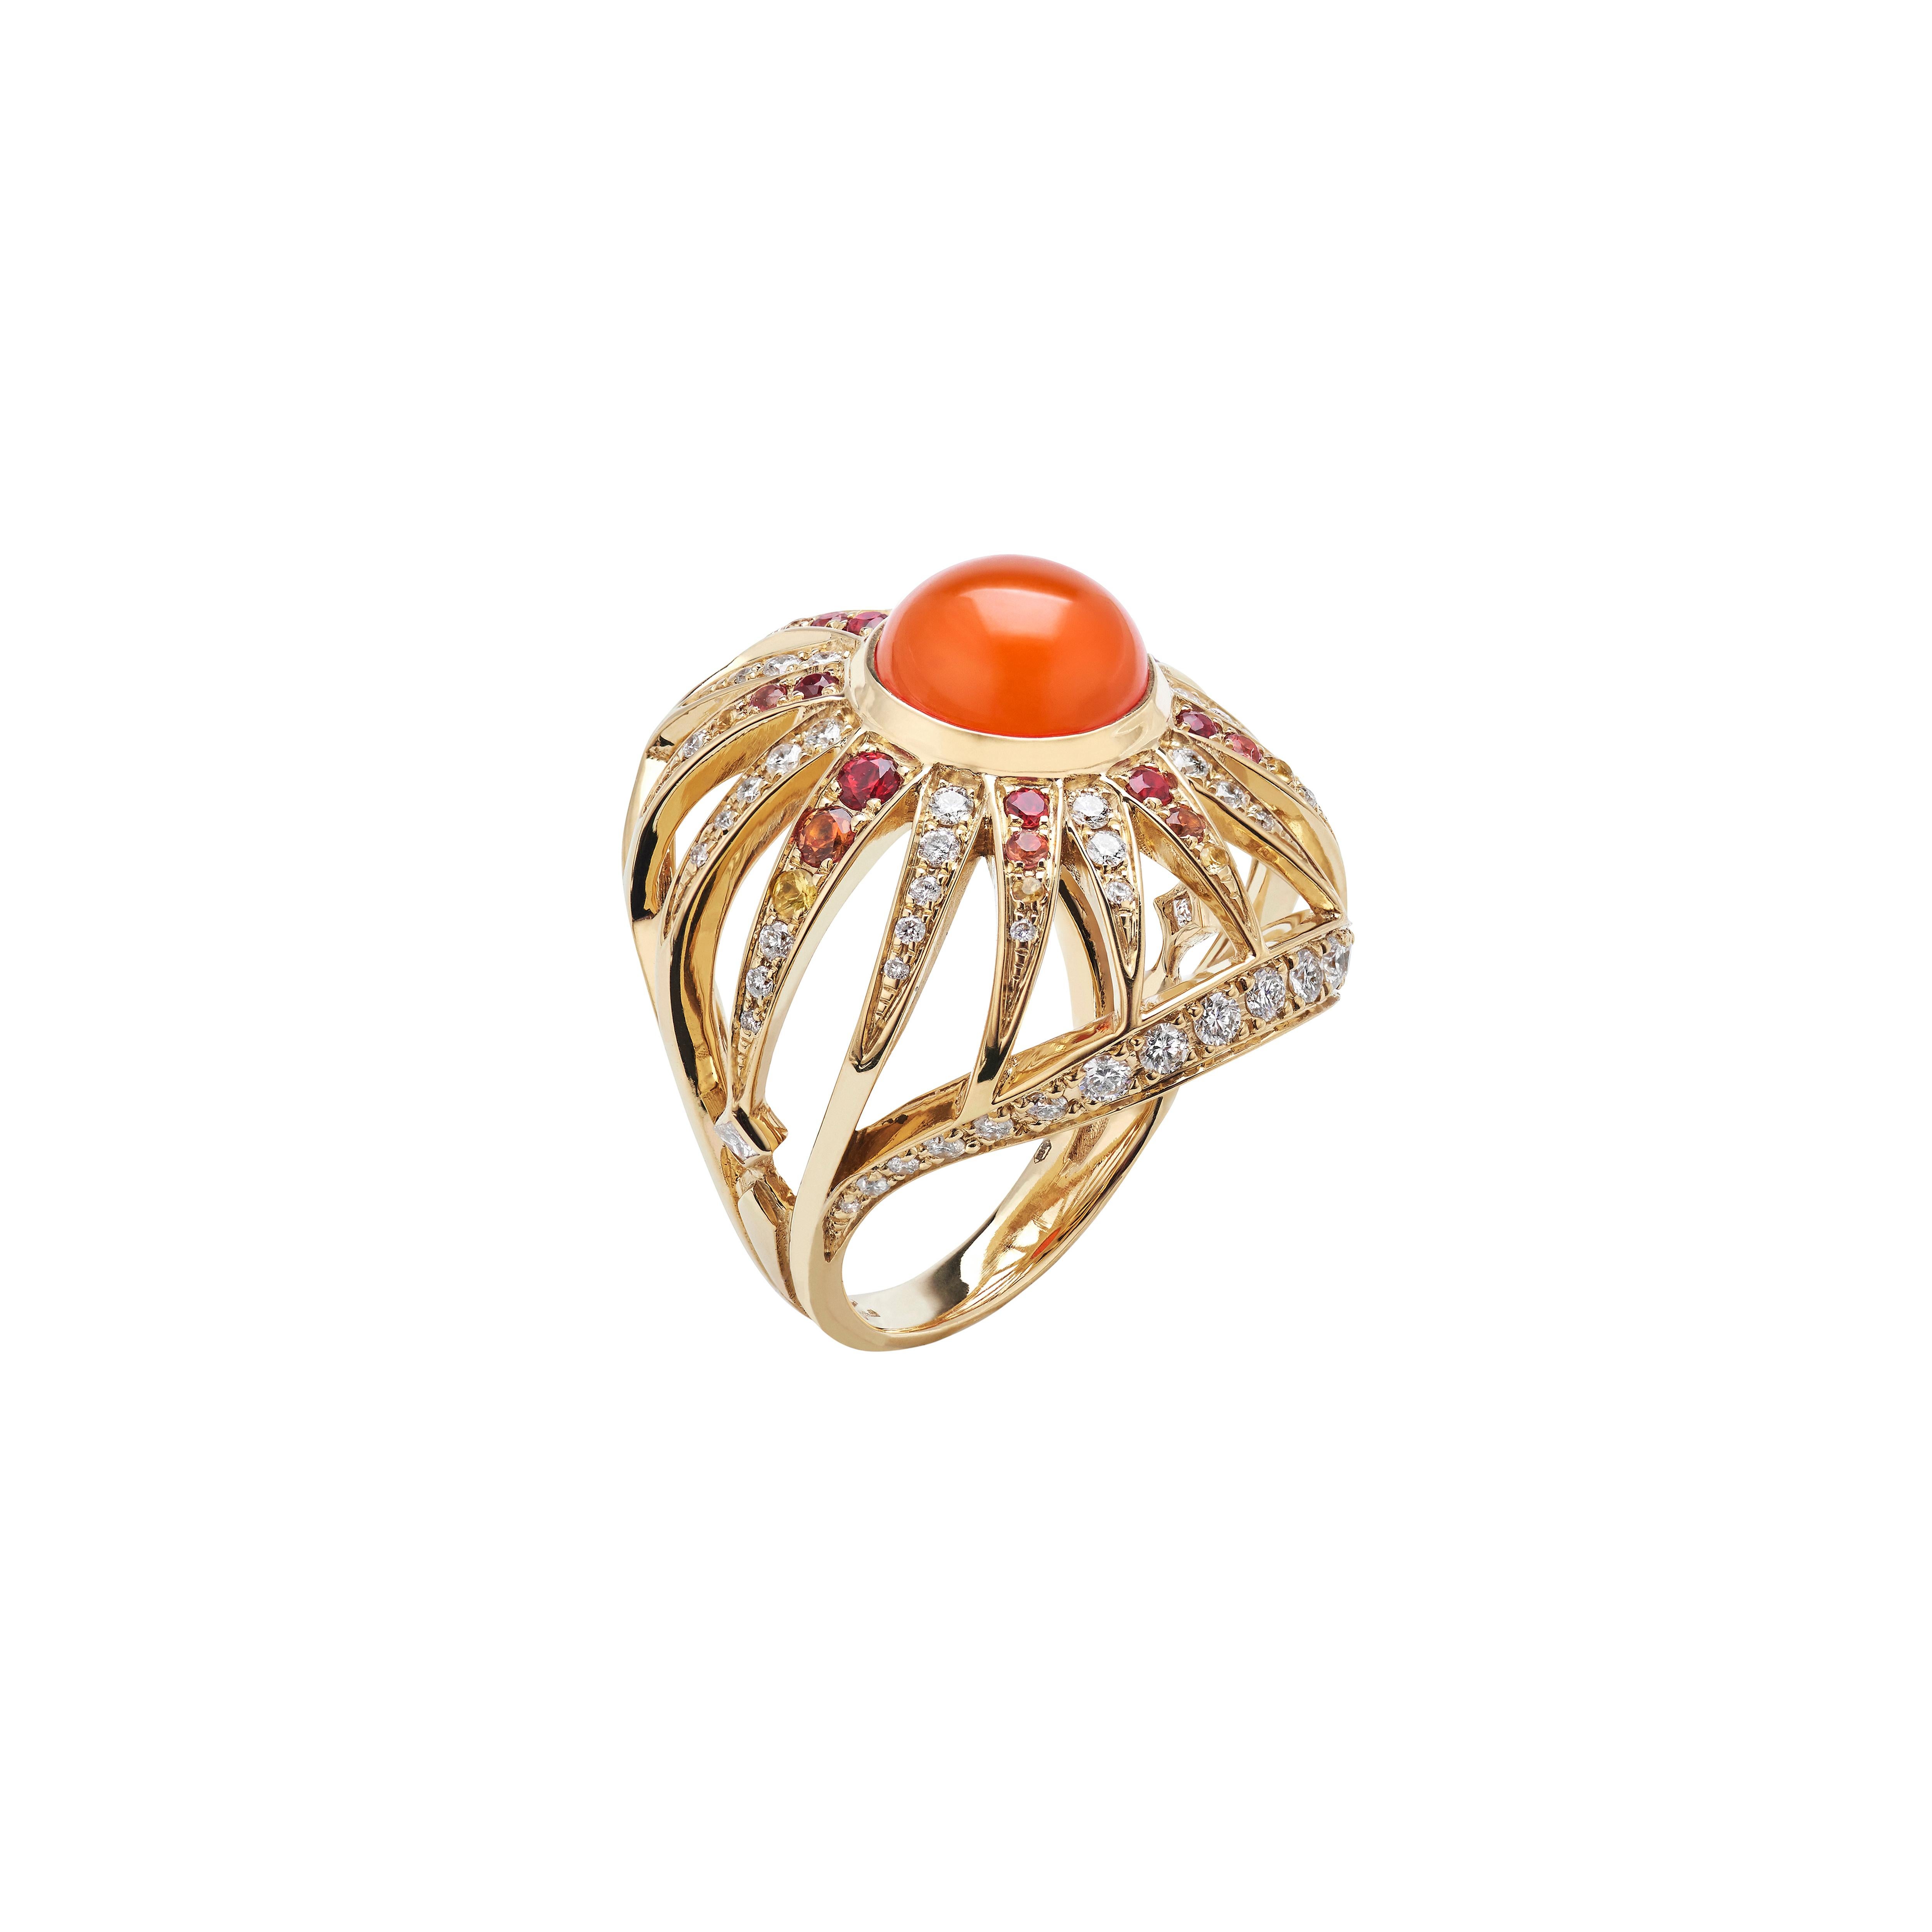 Ring size 52 & 54 available.
(Alternative sizes available on a made to order basis, with an estimated delivery time of 4-6 weeks)

18k Yellow Gold approx. 13gr, 82 Diamonds 0.95ct, 1 Carnelian 2.37ct, 16 Orange Sapphires 0.35ct & 10 Yellow Sapphires